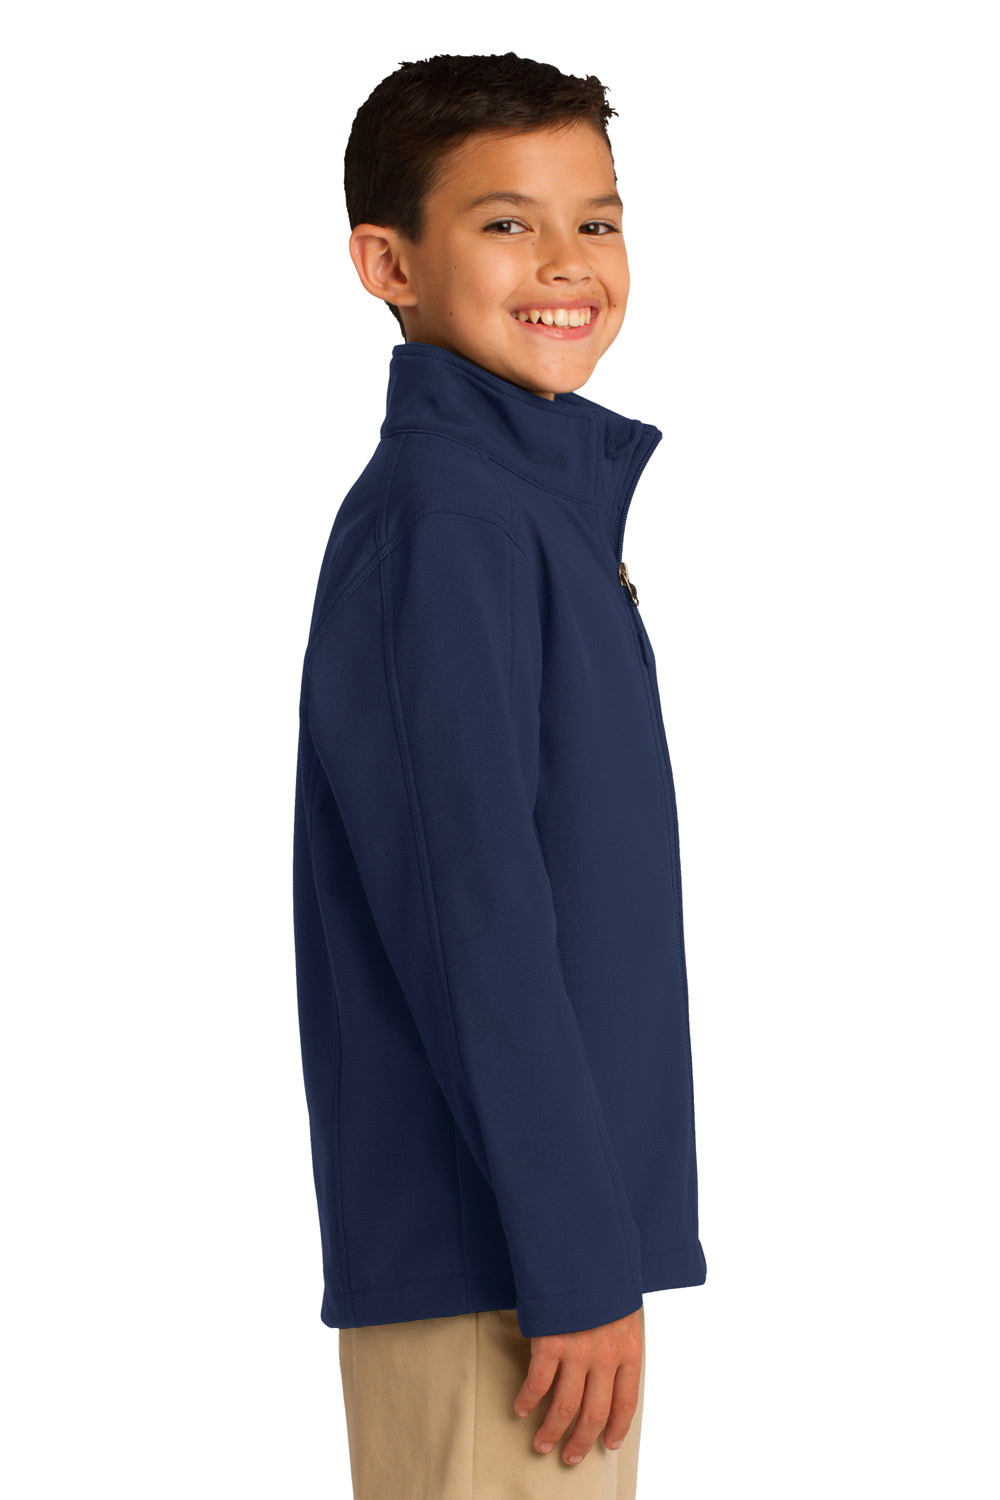 Port Authority Y317 Youth Core Wind & Water Resistant Full Zip Jacket Navy Blue Side